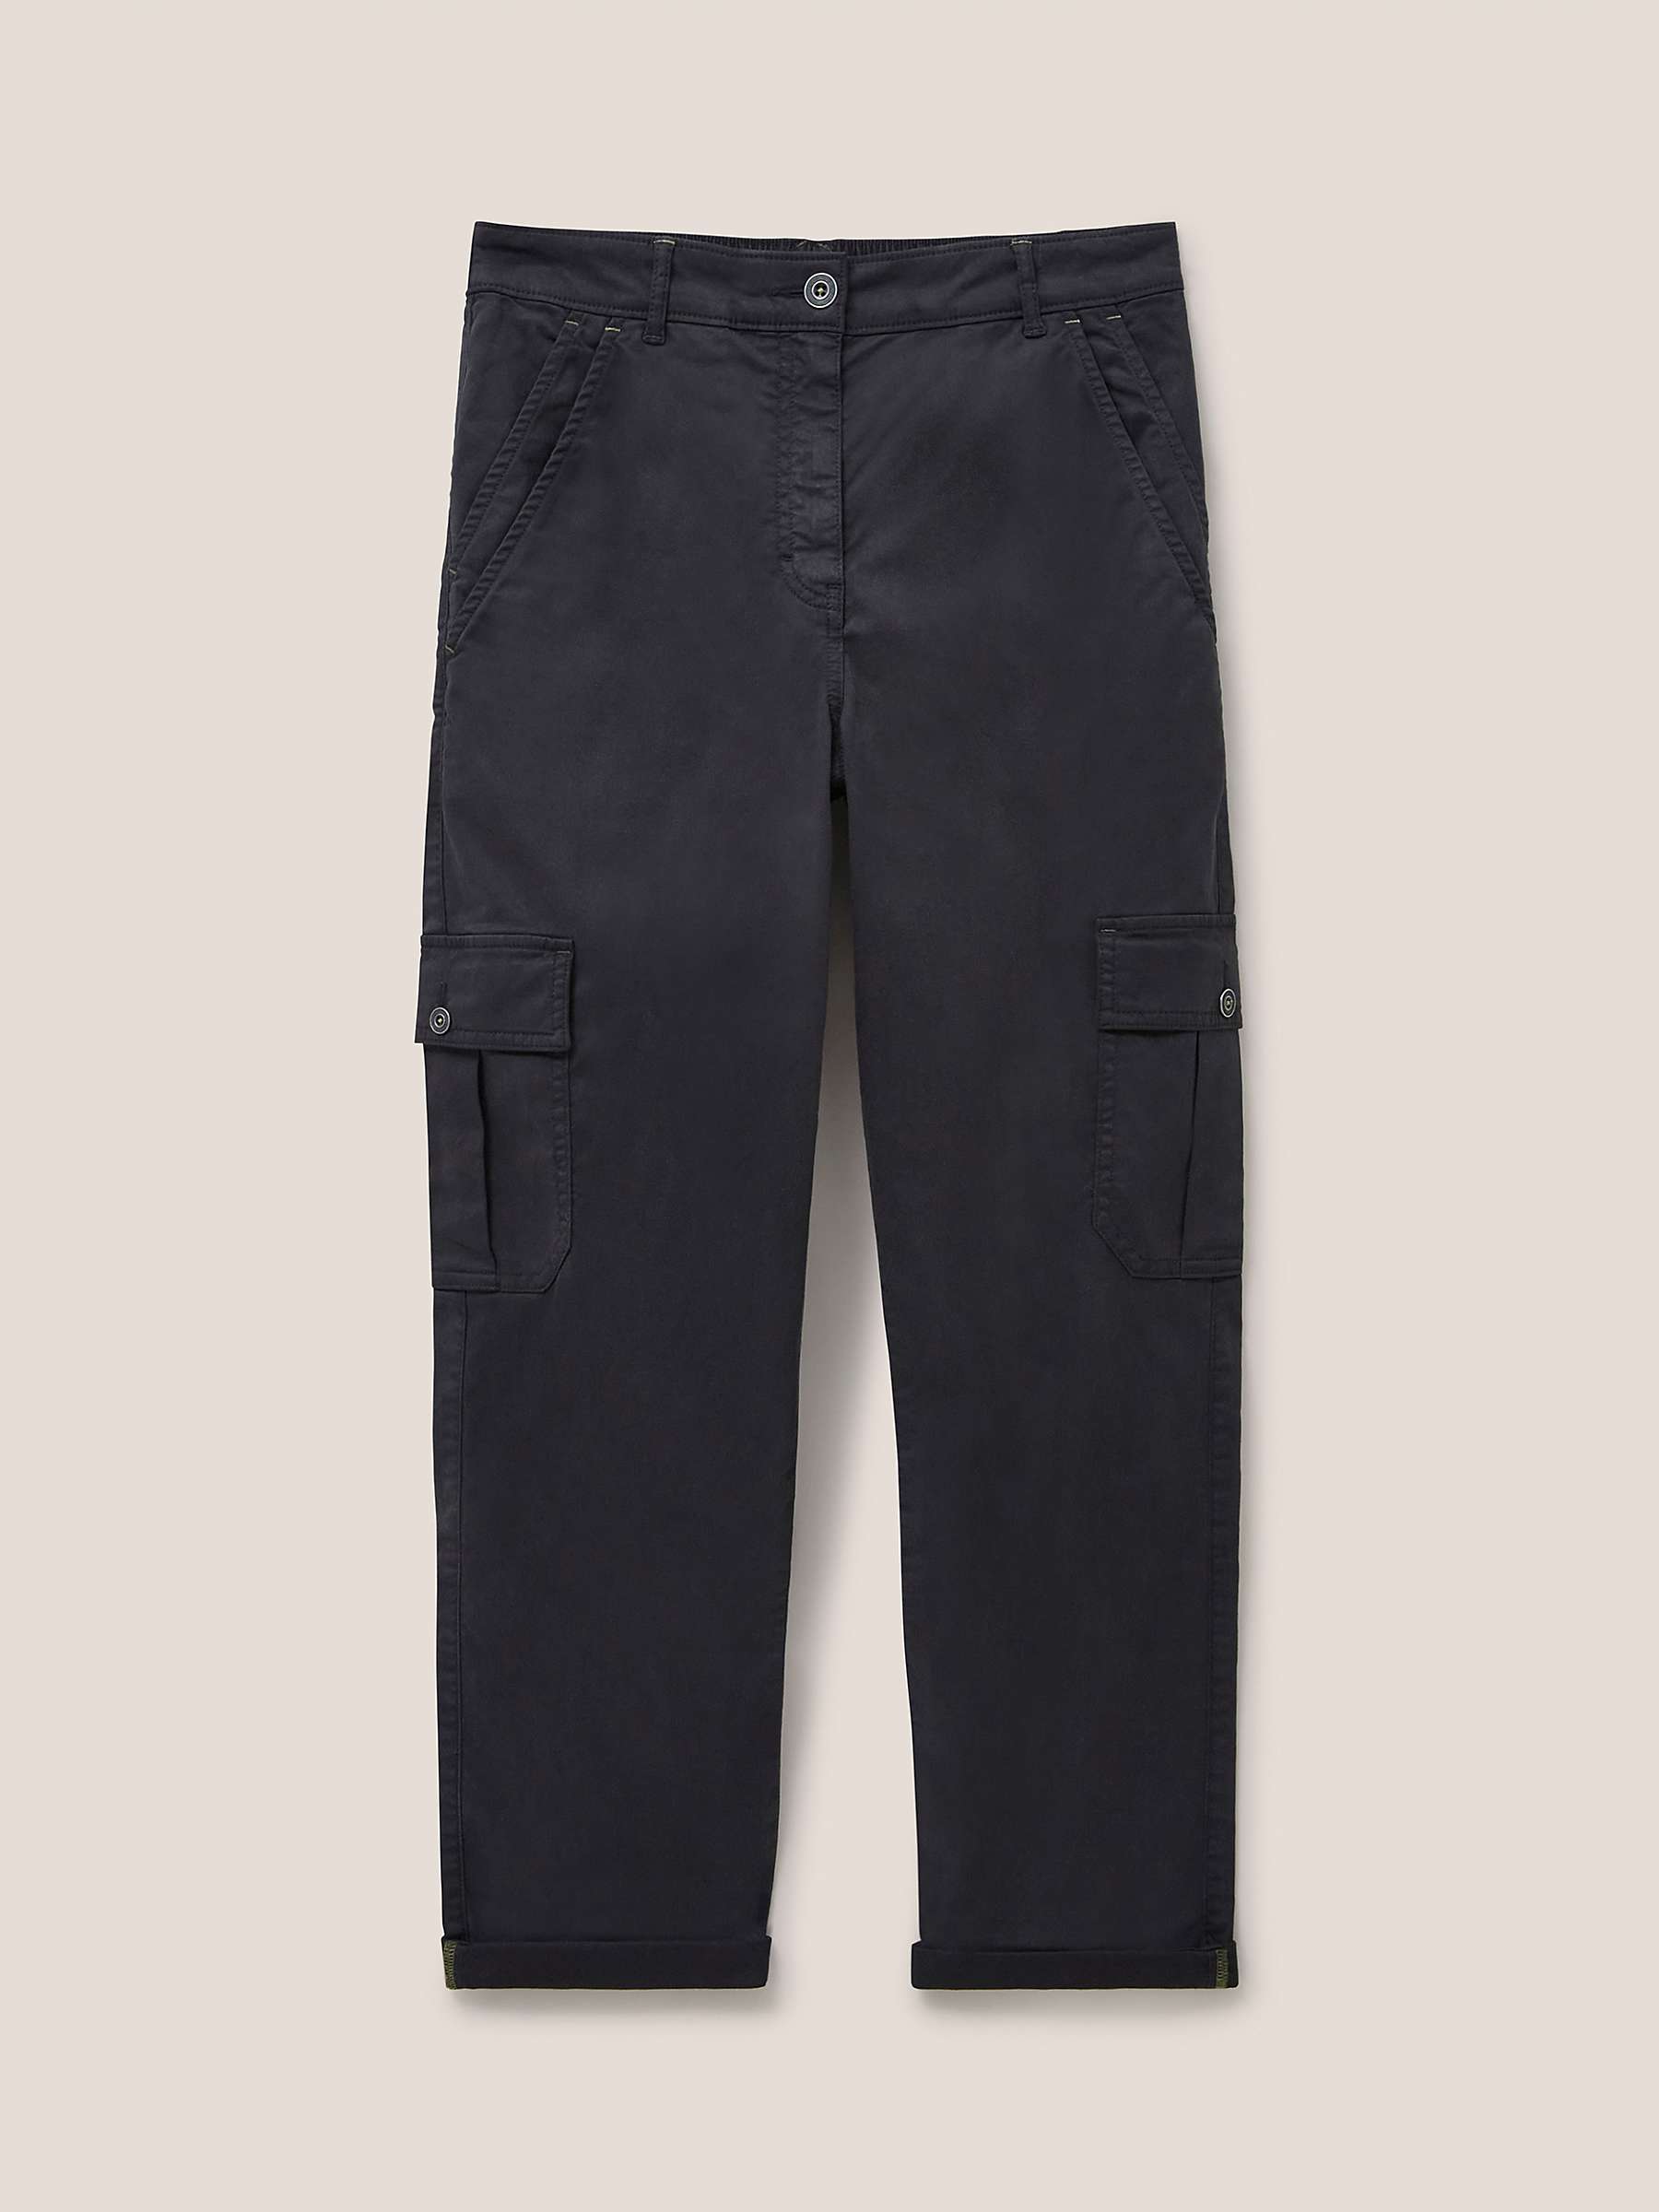 Buy White Stuff Everleigh Cropped Cargo Trousers, Washed Black Online at johnlewis.com